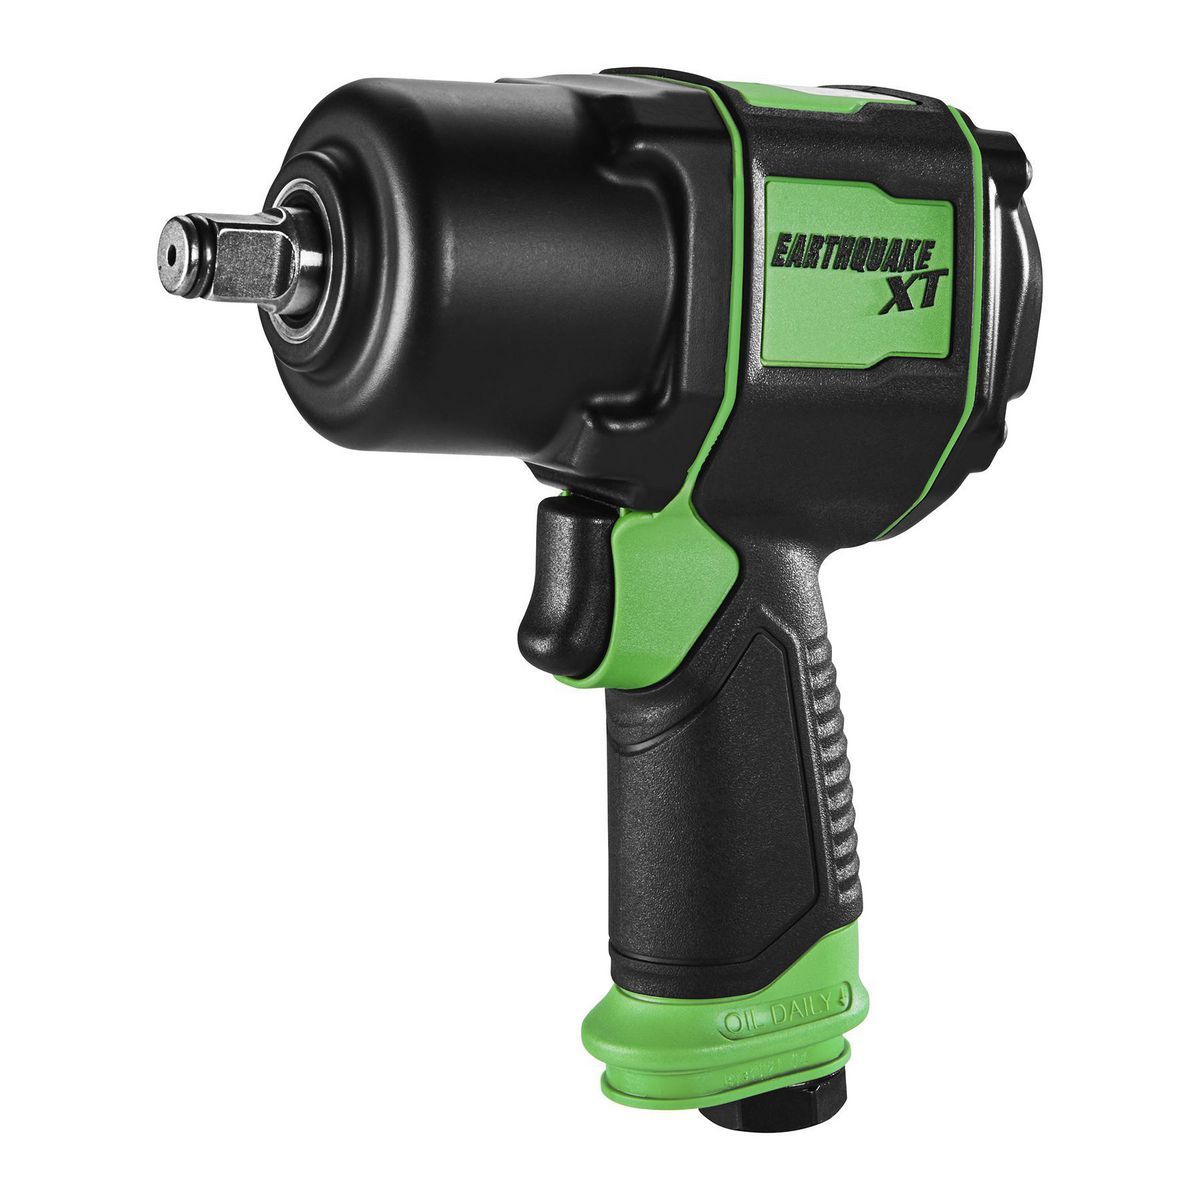 1/2 in. Super Compact Air Impact Wrench, Green